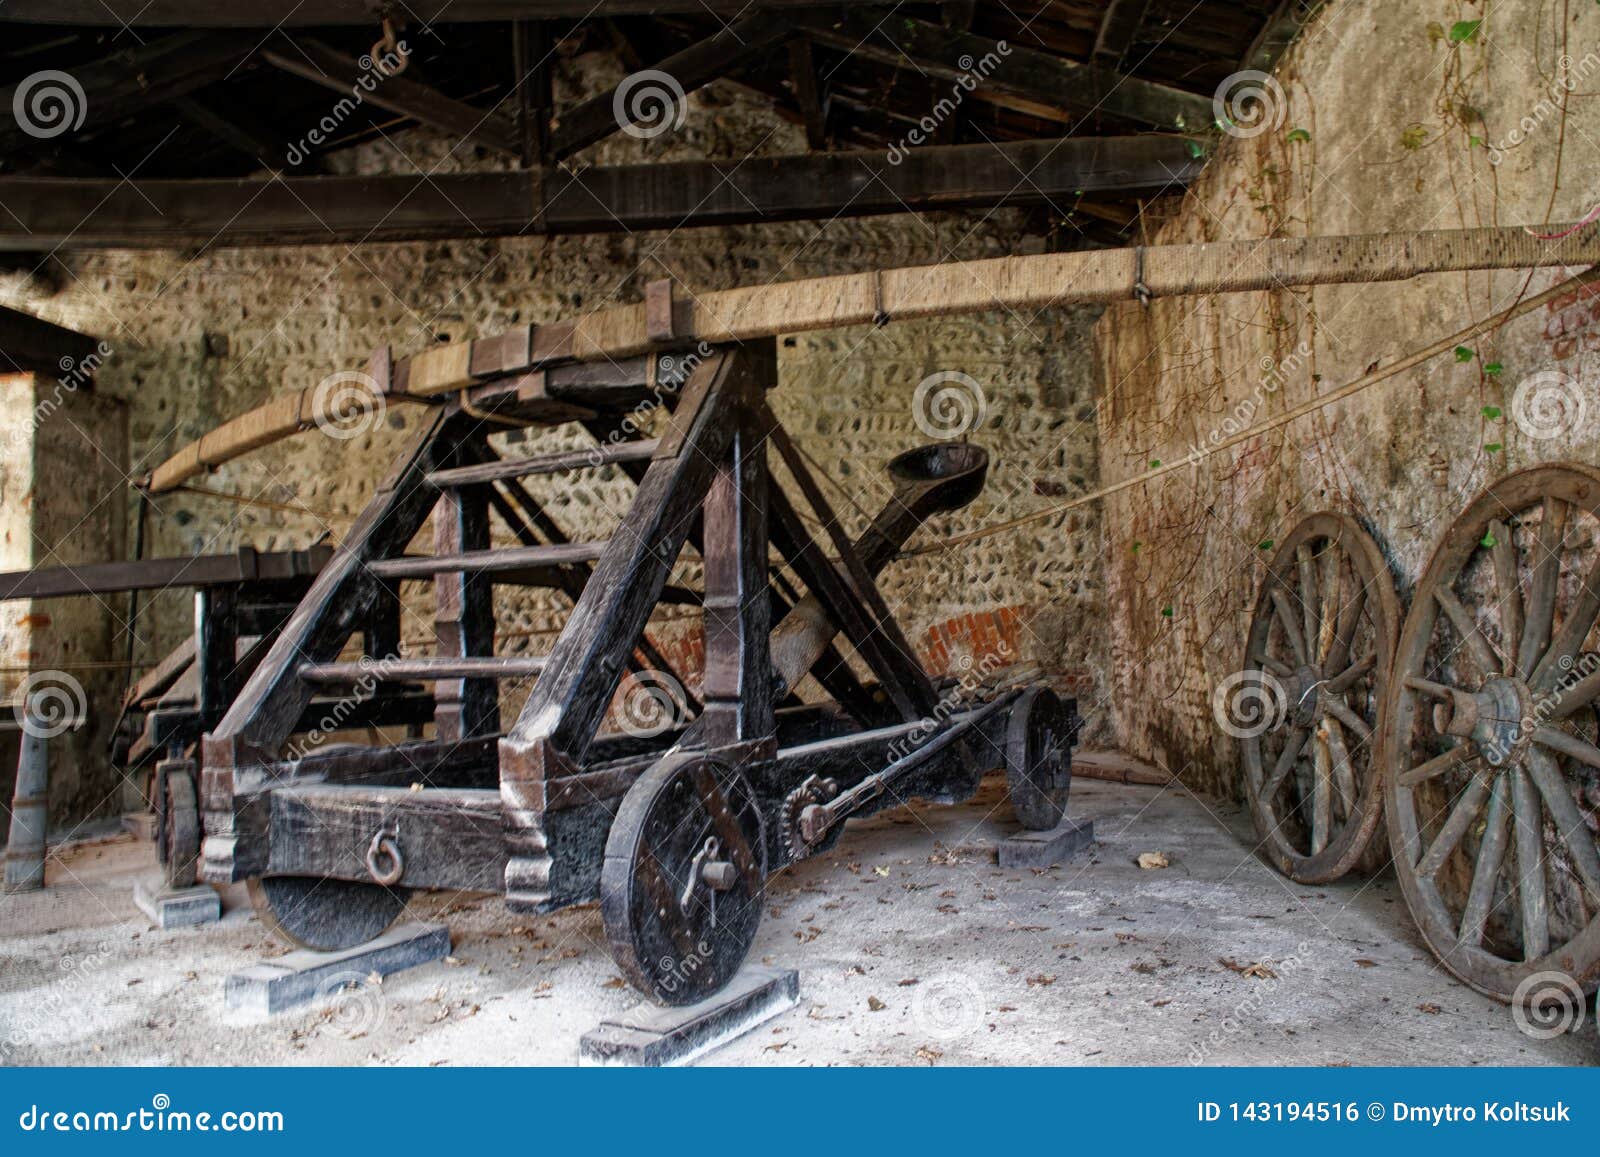 Medieval Siege Weapons, Catapult with Bow Engine. Editorial Photo